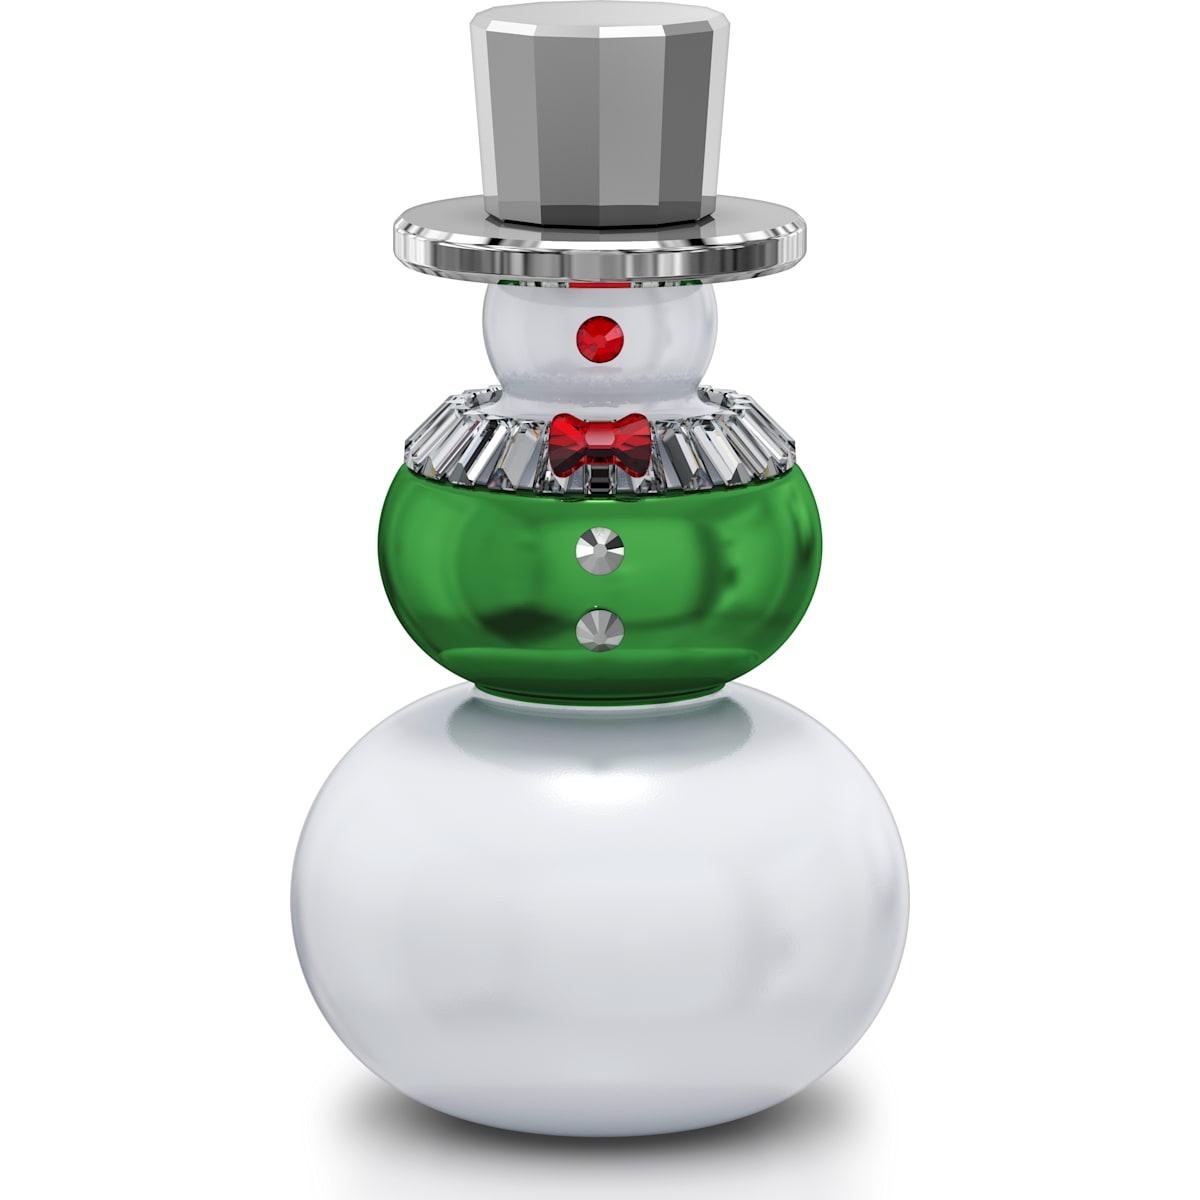 HOLIDAY CHEERS:SNOWMAN